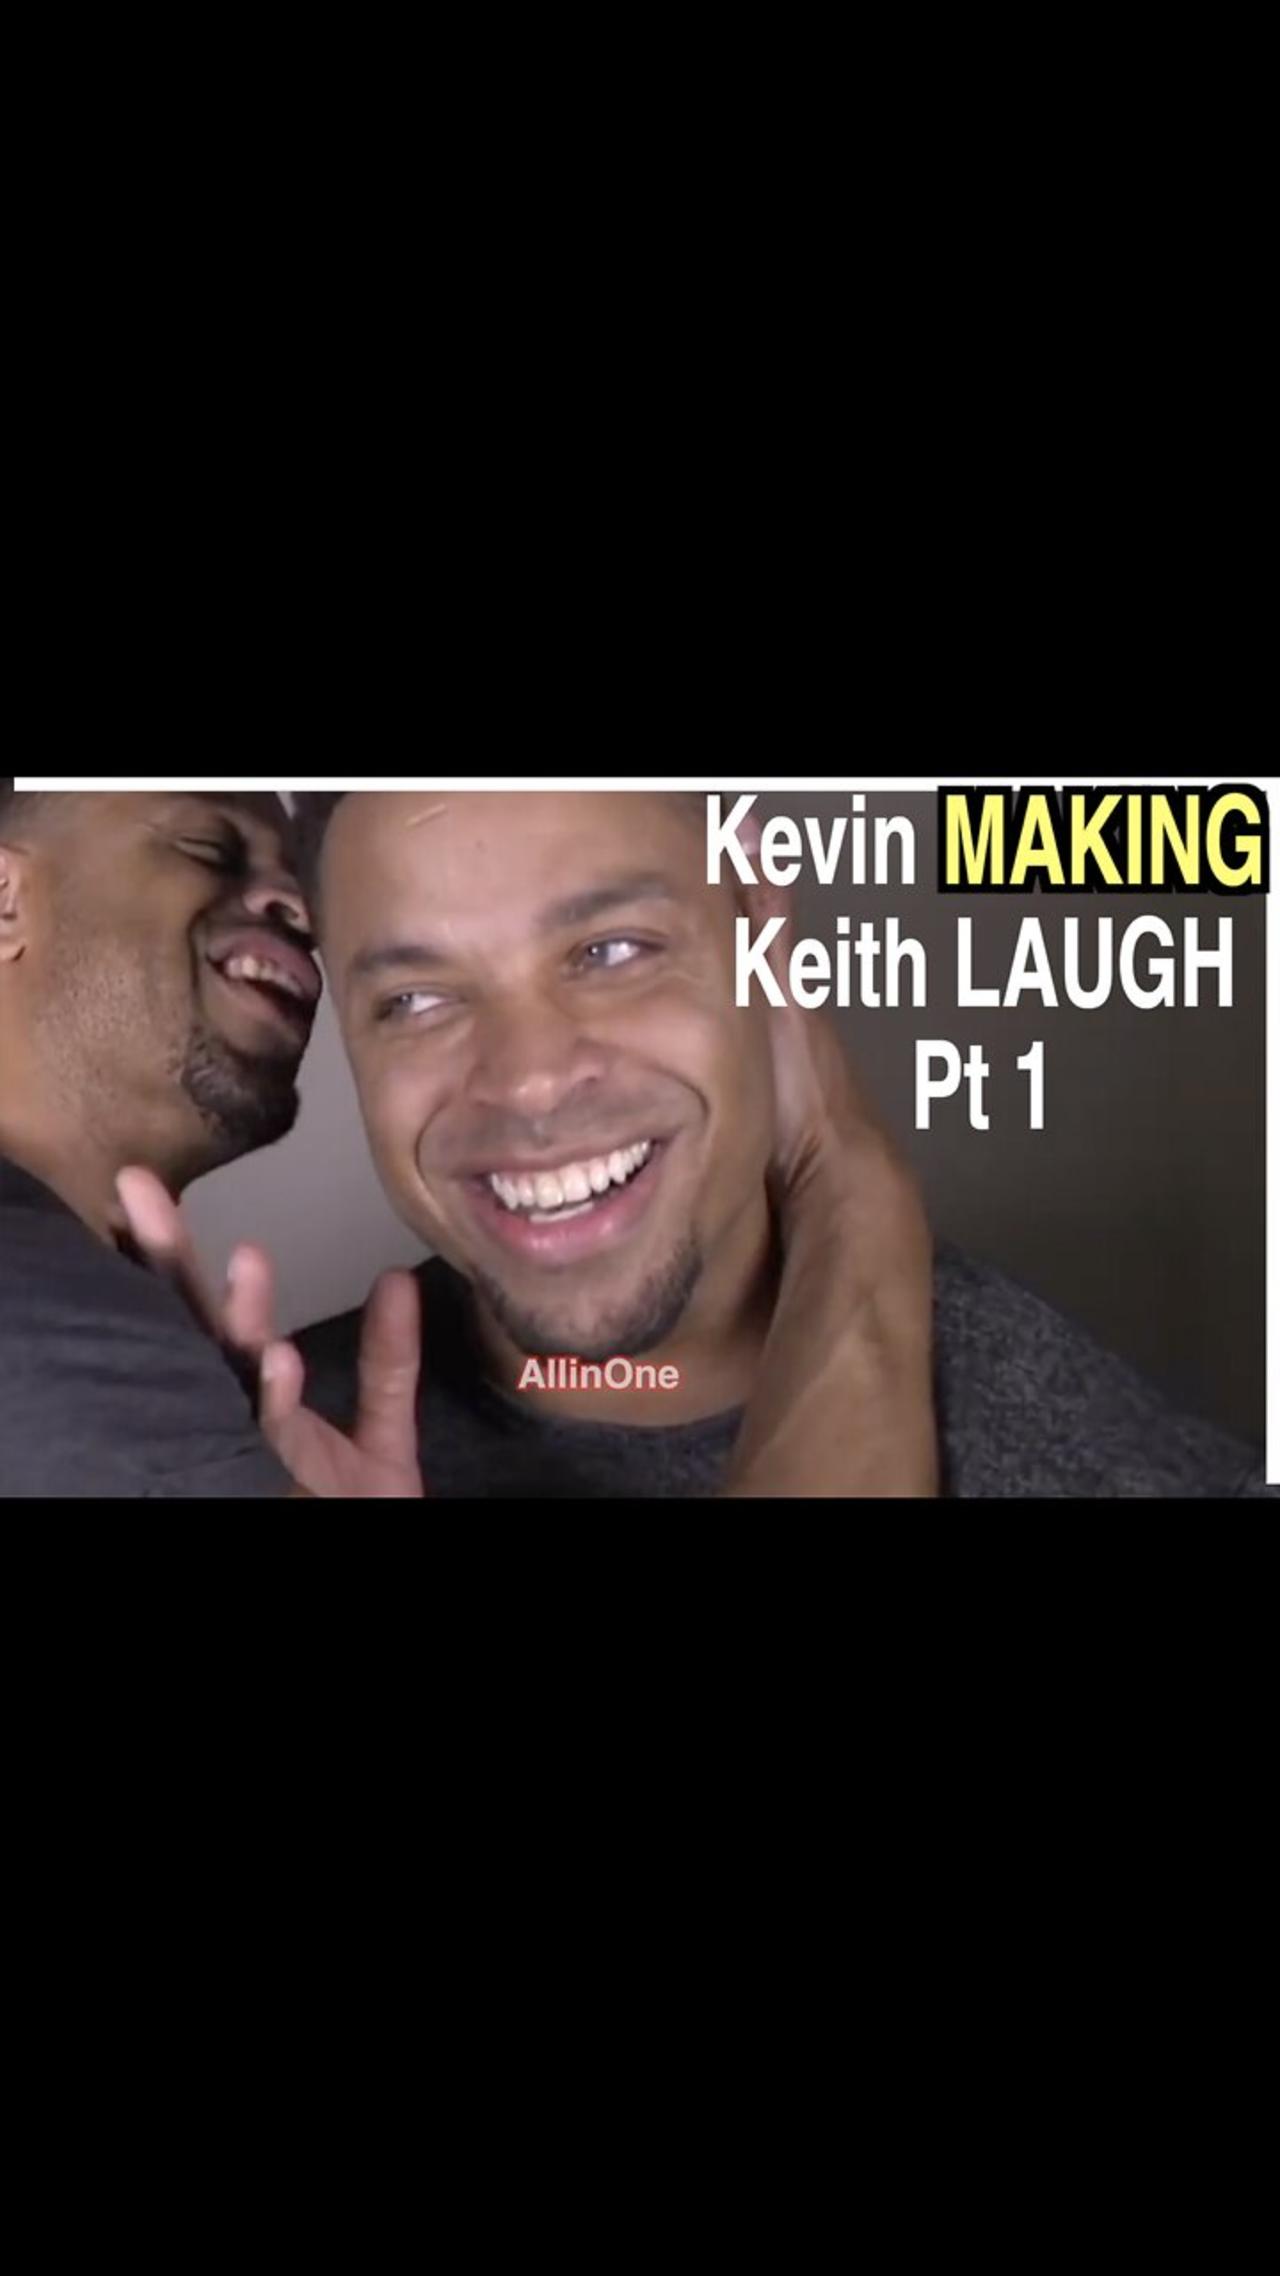 Kevin Making Keith Laugh: HodgeTwins!!!!! OUT NOW!!!!! #Comedy #Funny #AllinOne #funnyvideo #laugh